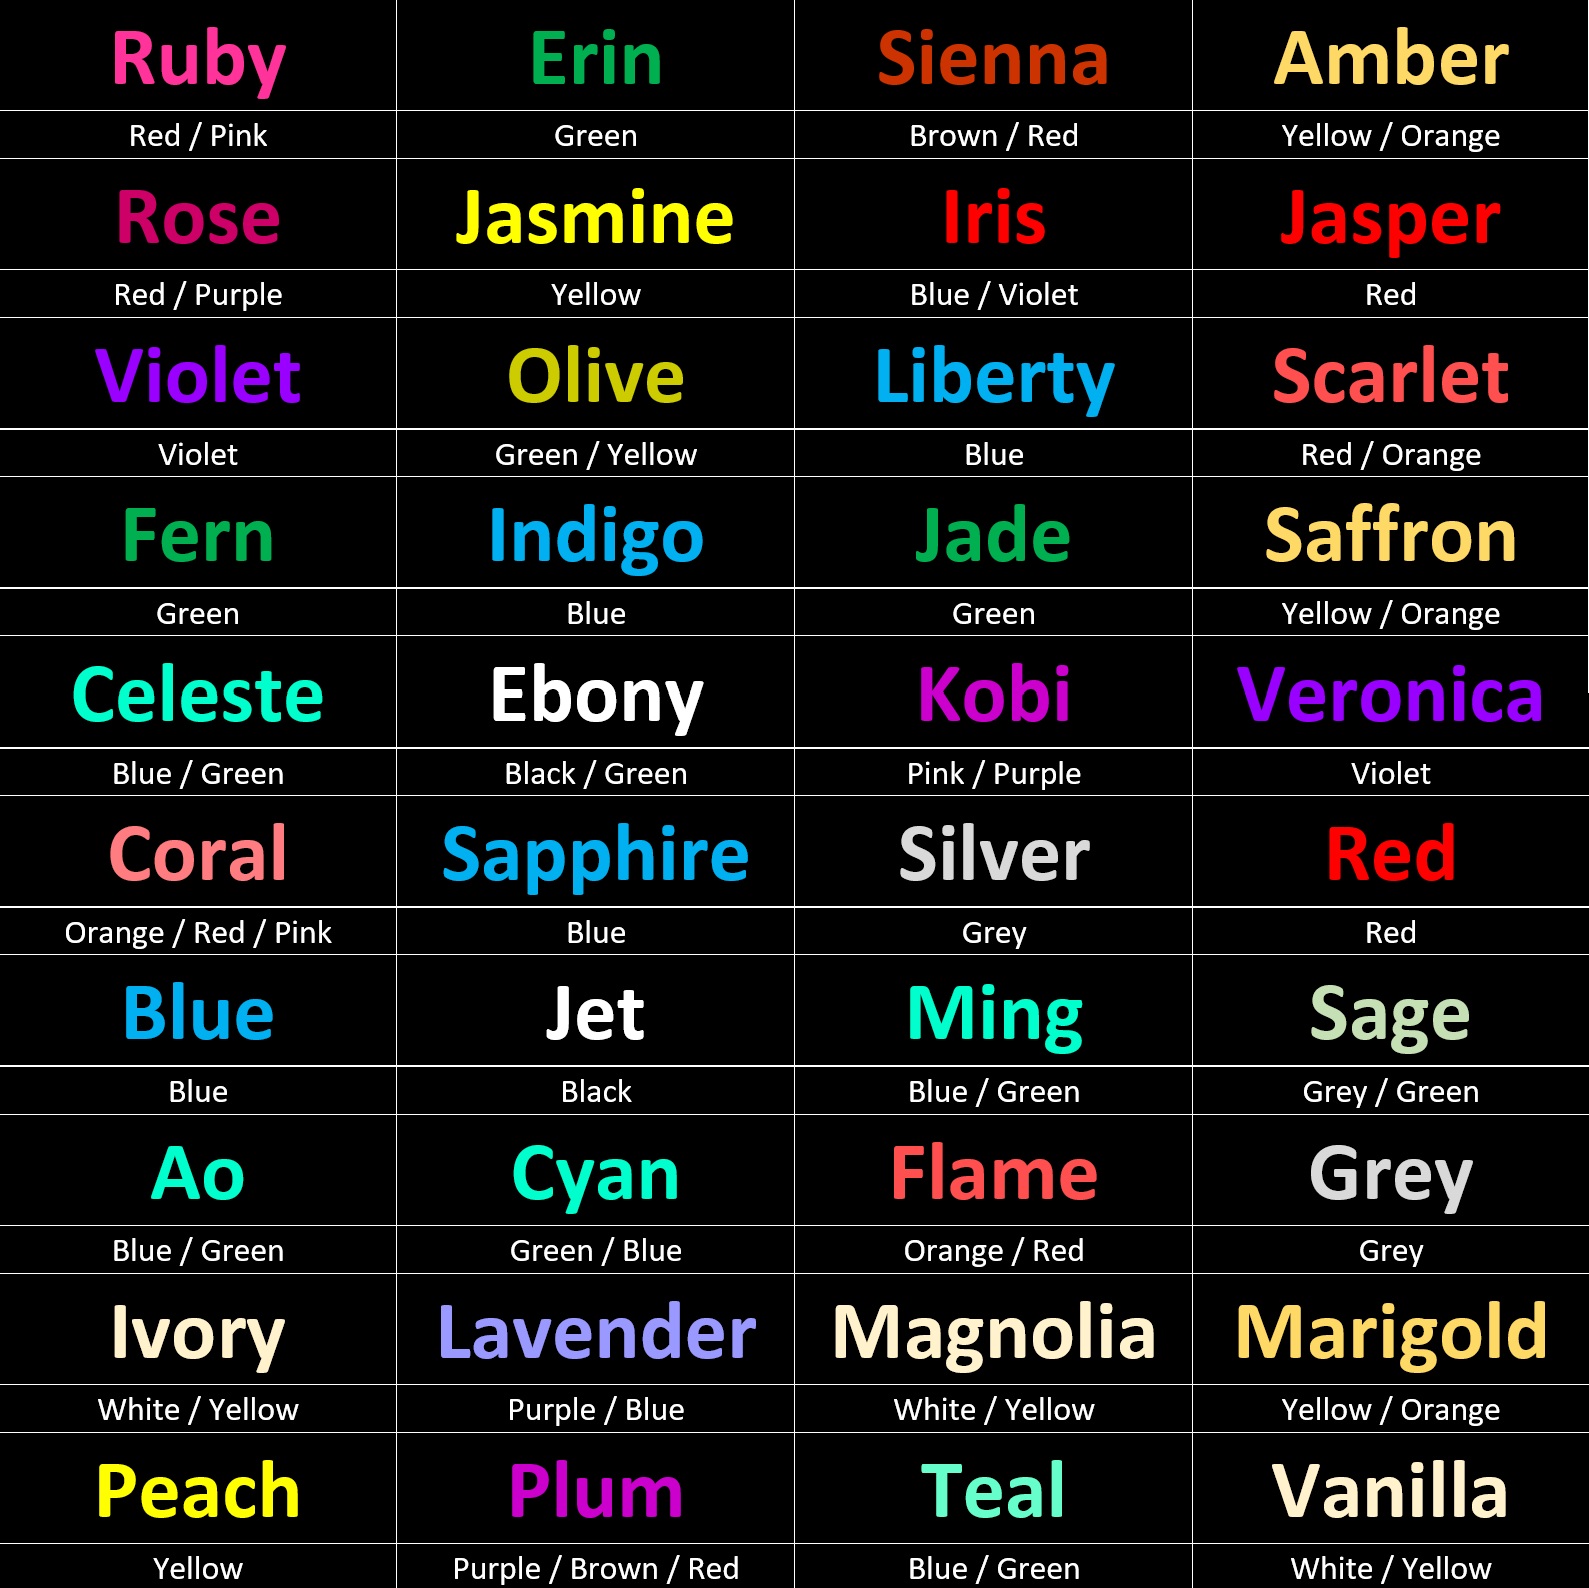 A list of names inspired by different colours. The names are Ruby for Red or Pink; Erin for Green; Sienna for Brown or Red; Amber for Yellow or Orange; Rose for Red or Purple; Jasmine for Yellow; Iris for Blue or Violet; Jasper for Red; Violet for Violet; Olive for Green or Yellow; Liberty for Blue; Scarlet for Red or Orange; Fern for Green; Indigo for Blue; Jade for Green; Saffron for Yellow or Orange; Celeste for Blue or Green; Ebony for Black or Green; Kobi for Pink or Purple; Veronica for Violet; Coral for Orange, Red, or Pink; Sapphire for Blue; Silver for Grey; Red for Red; Blue for Blue; Jet for Black; Ming for Blue or Green; Sage for Grey or Green; Ao for Blue or Green; Cyan for Green or Blue; Flame for Orange or Red; Grey for Grey; Ivory for White or Yellow; Lavender for Purple or Blue; Magnolia for White or Yellow; Marigold for Yellow or Orange; Peach for Yellow; Plum for Purple, Brown, or Red; Teal for Blue or Green; and Vanilla for White or Yellow. 